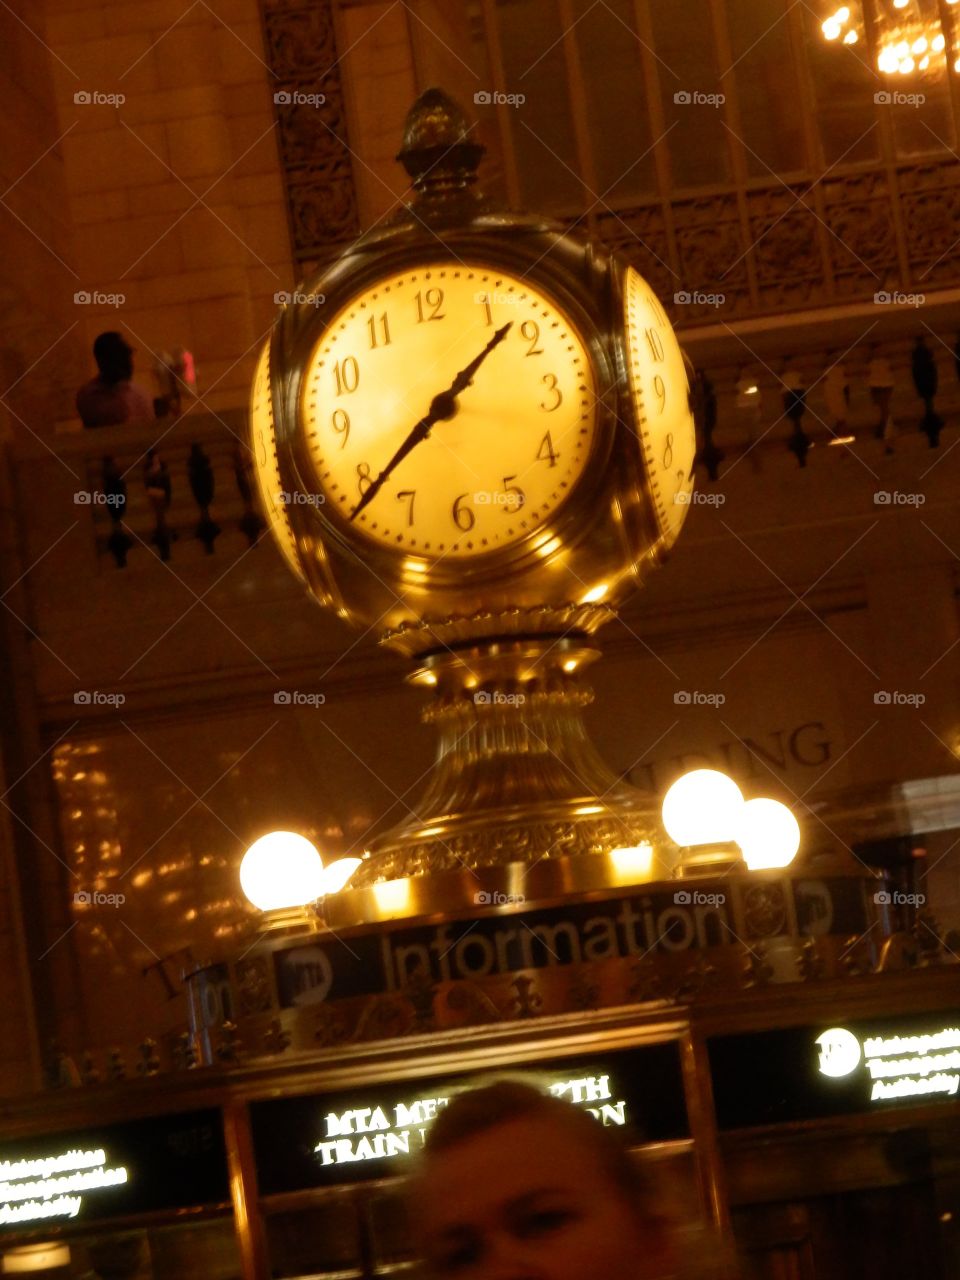 Grand Central Station clock